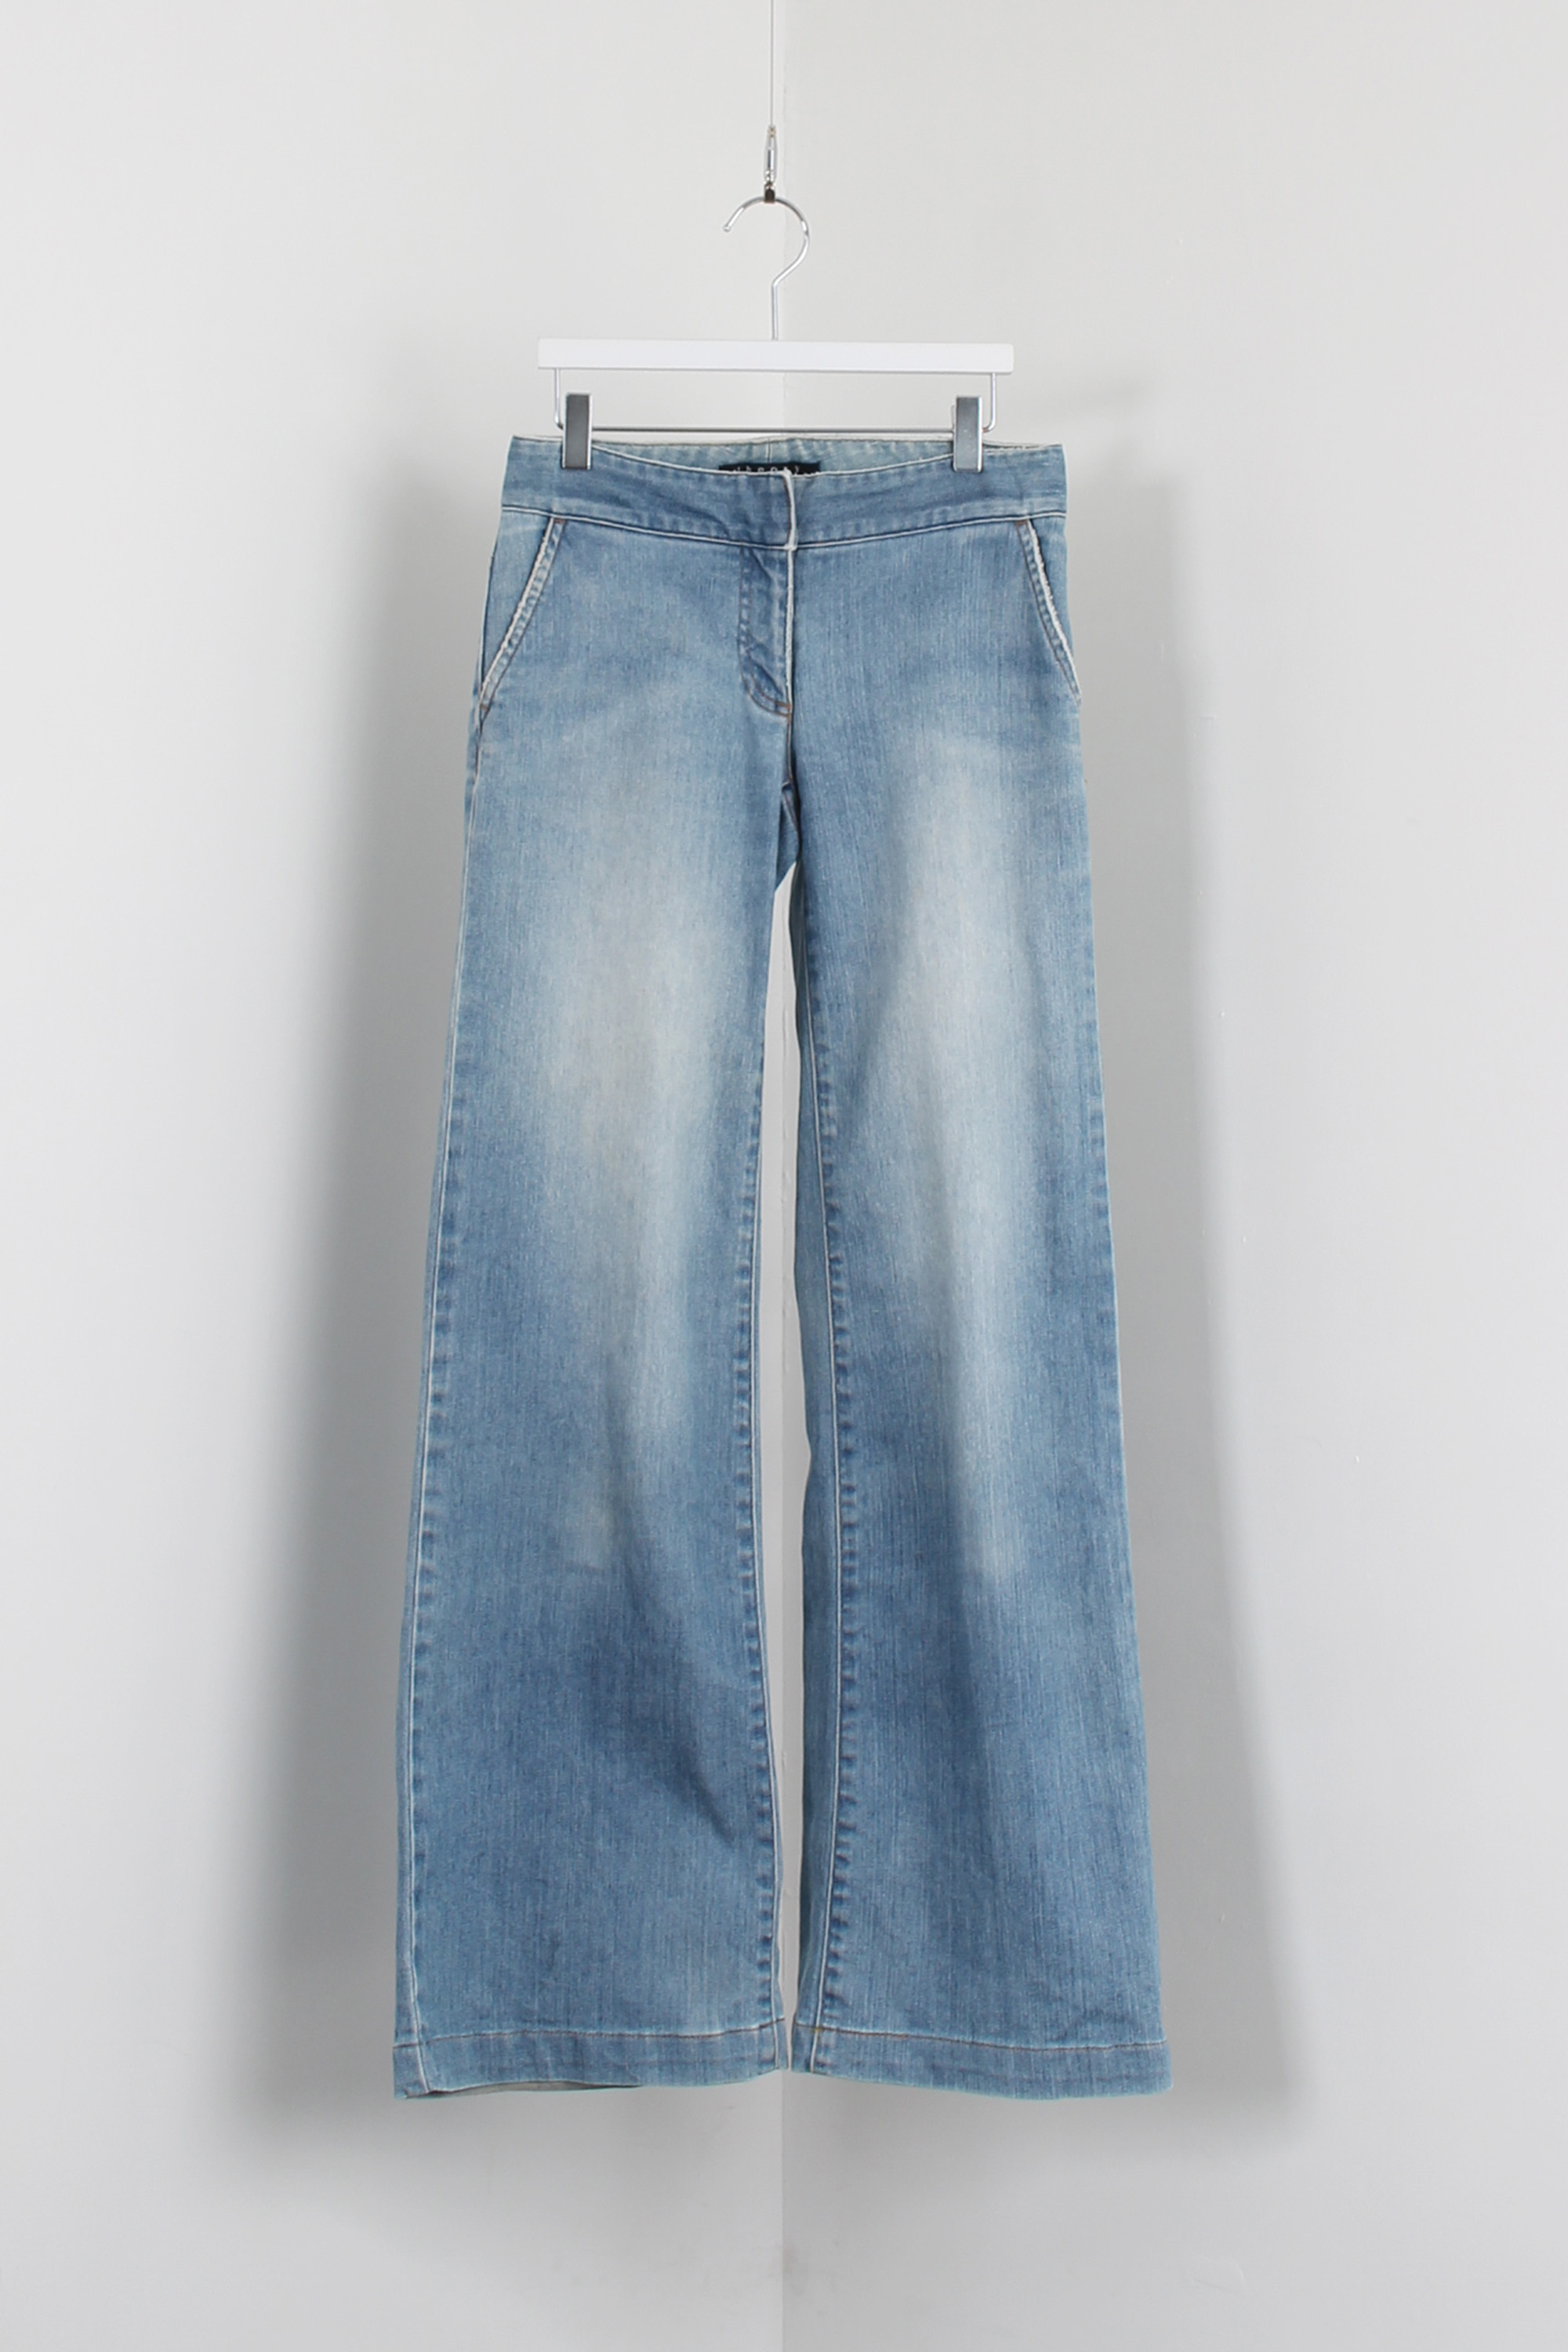 Theory Low Rise boot cut jean